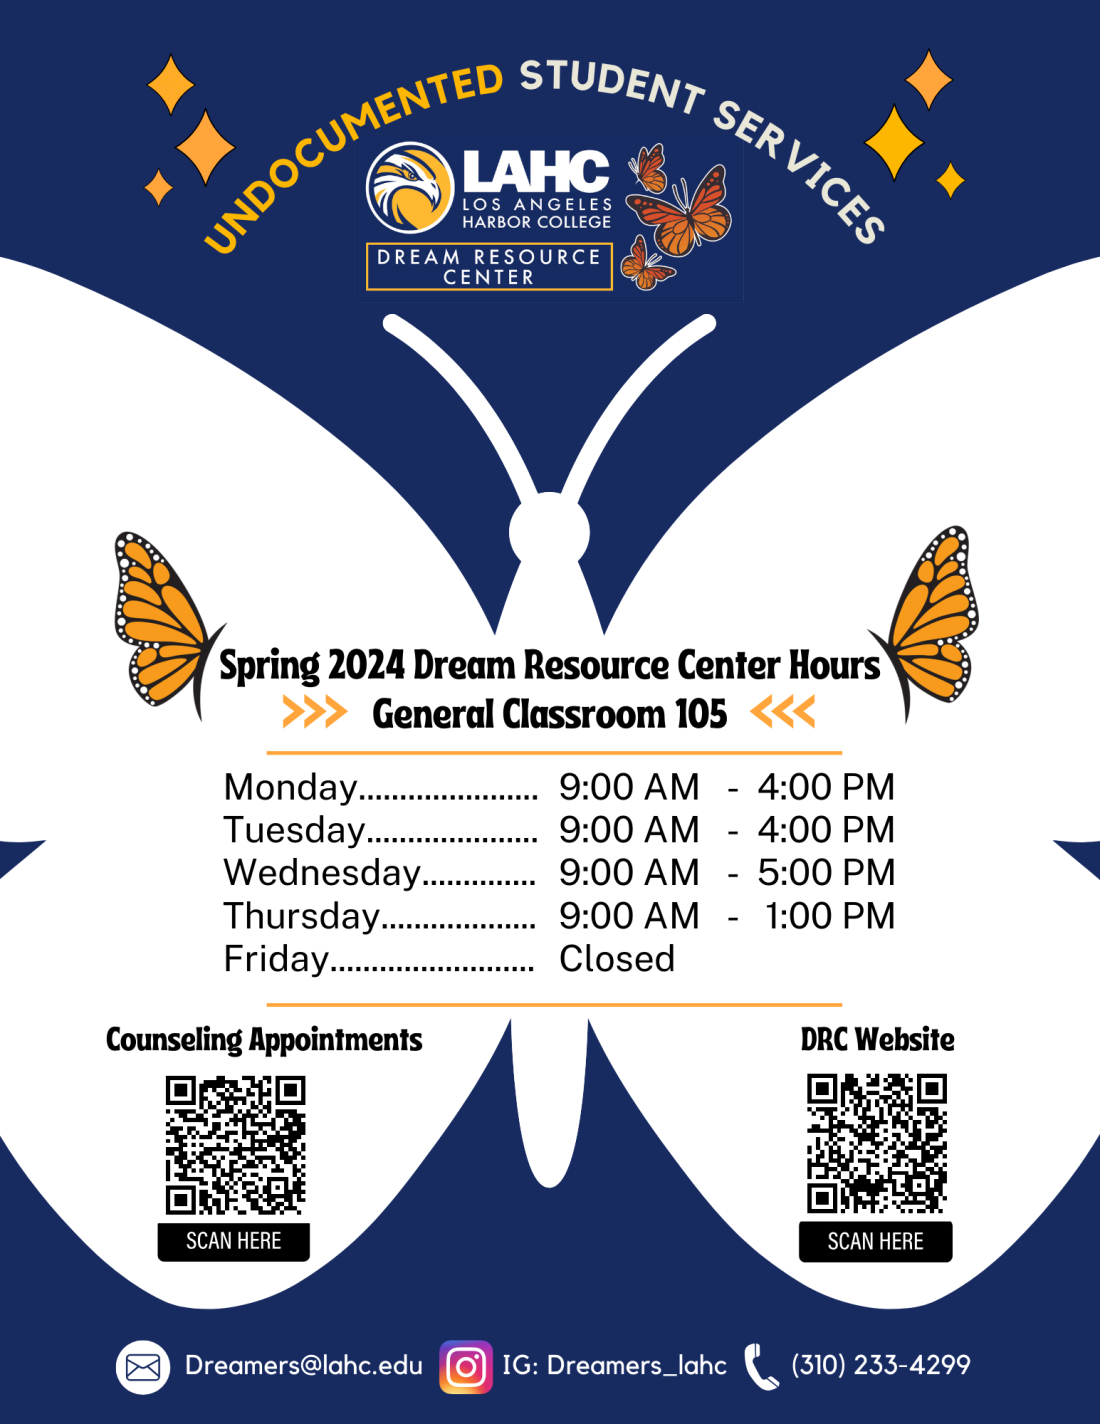 Spring 2024 hours for the Dream Resource Center